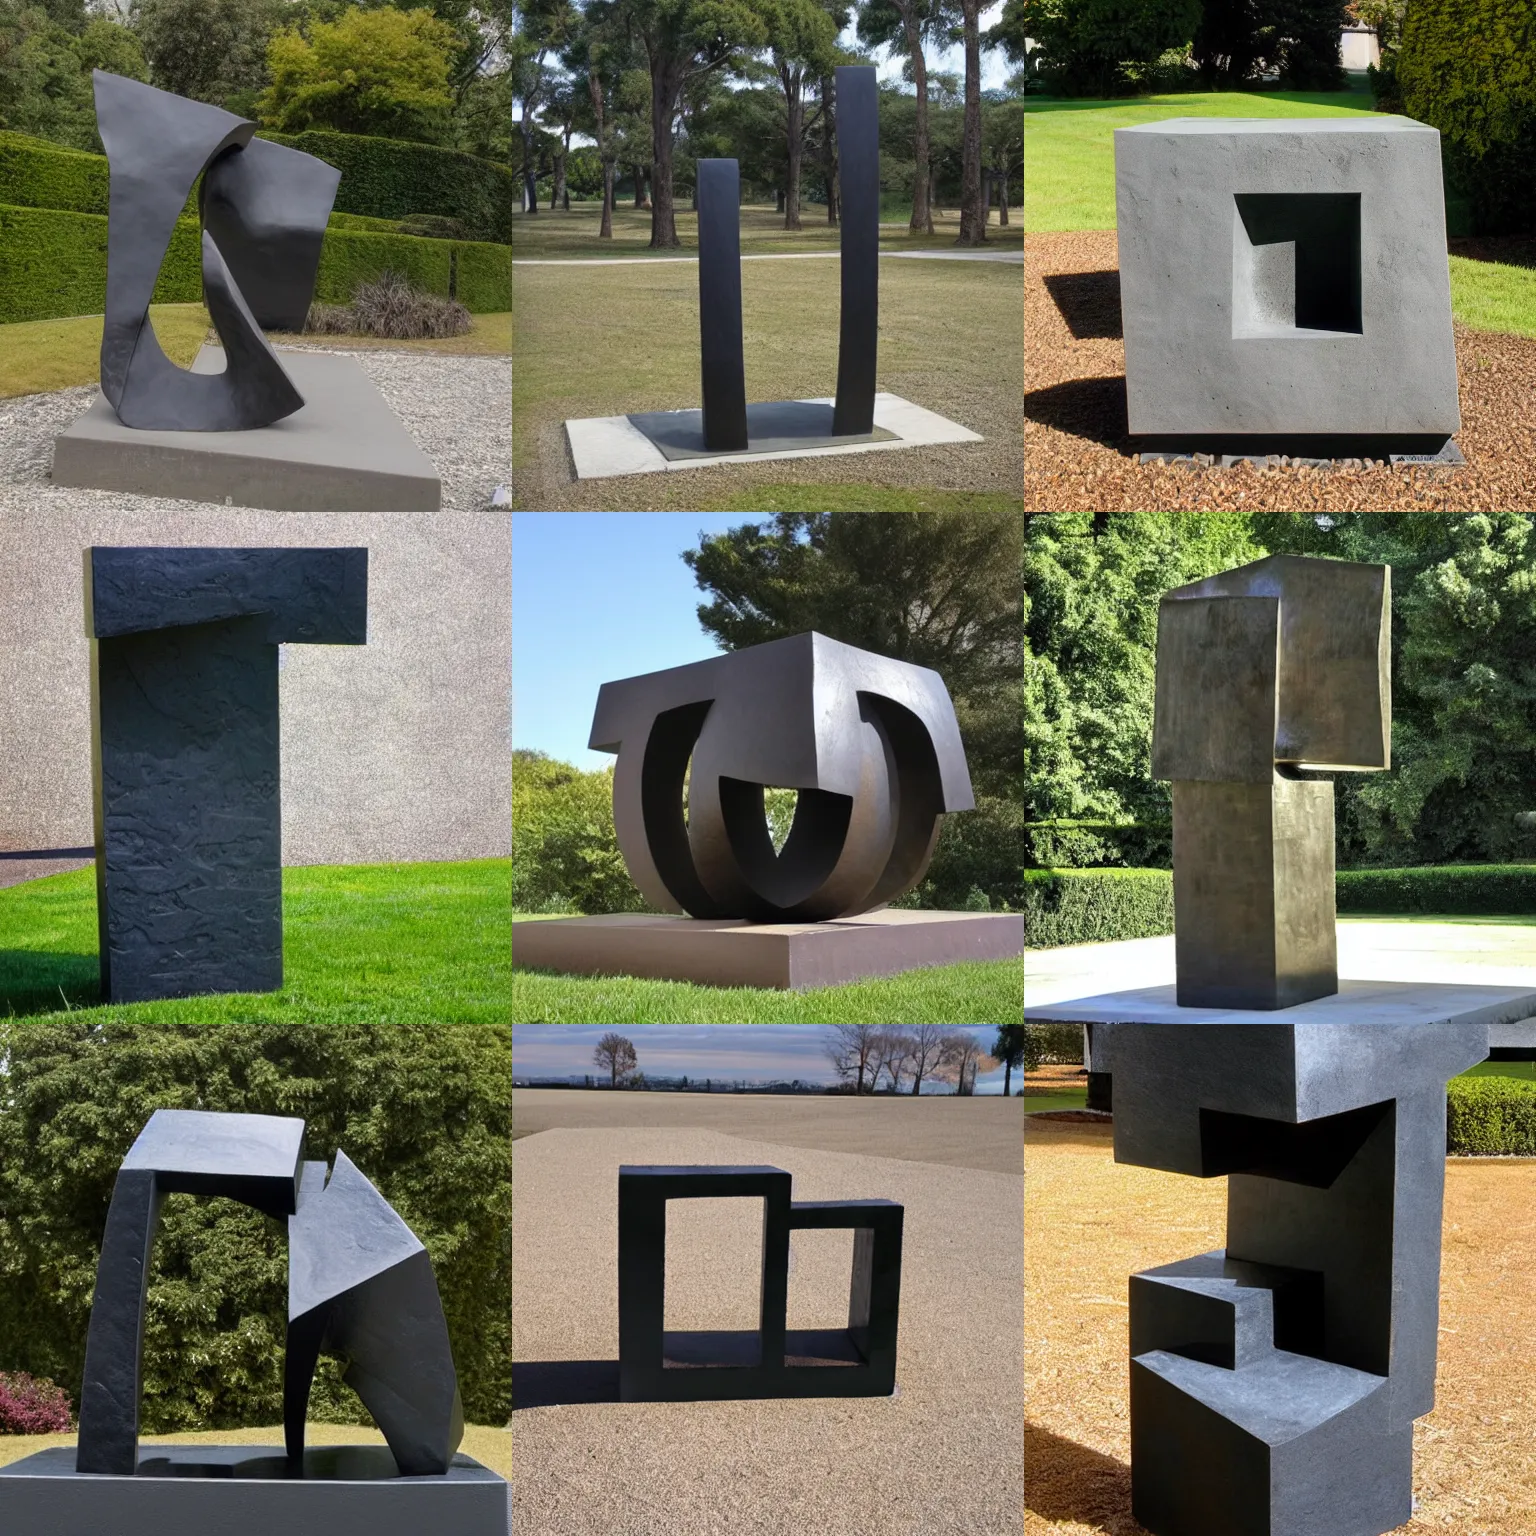 Prompt: Award-winning sculpture by Eduardo Chillida. The sculpture represents earth, a solid block. Made of steel, abstract style